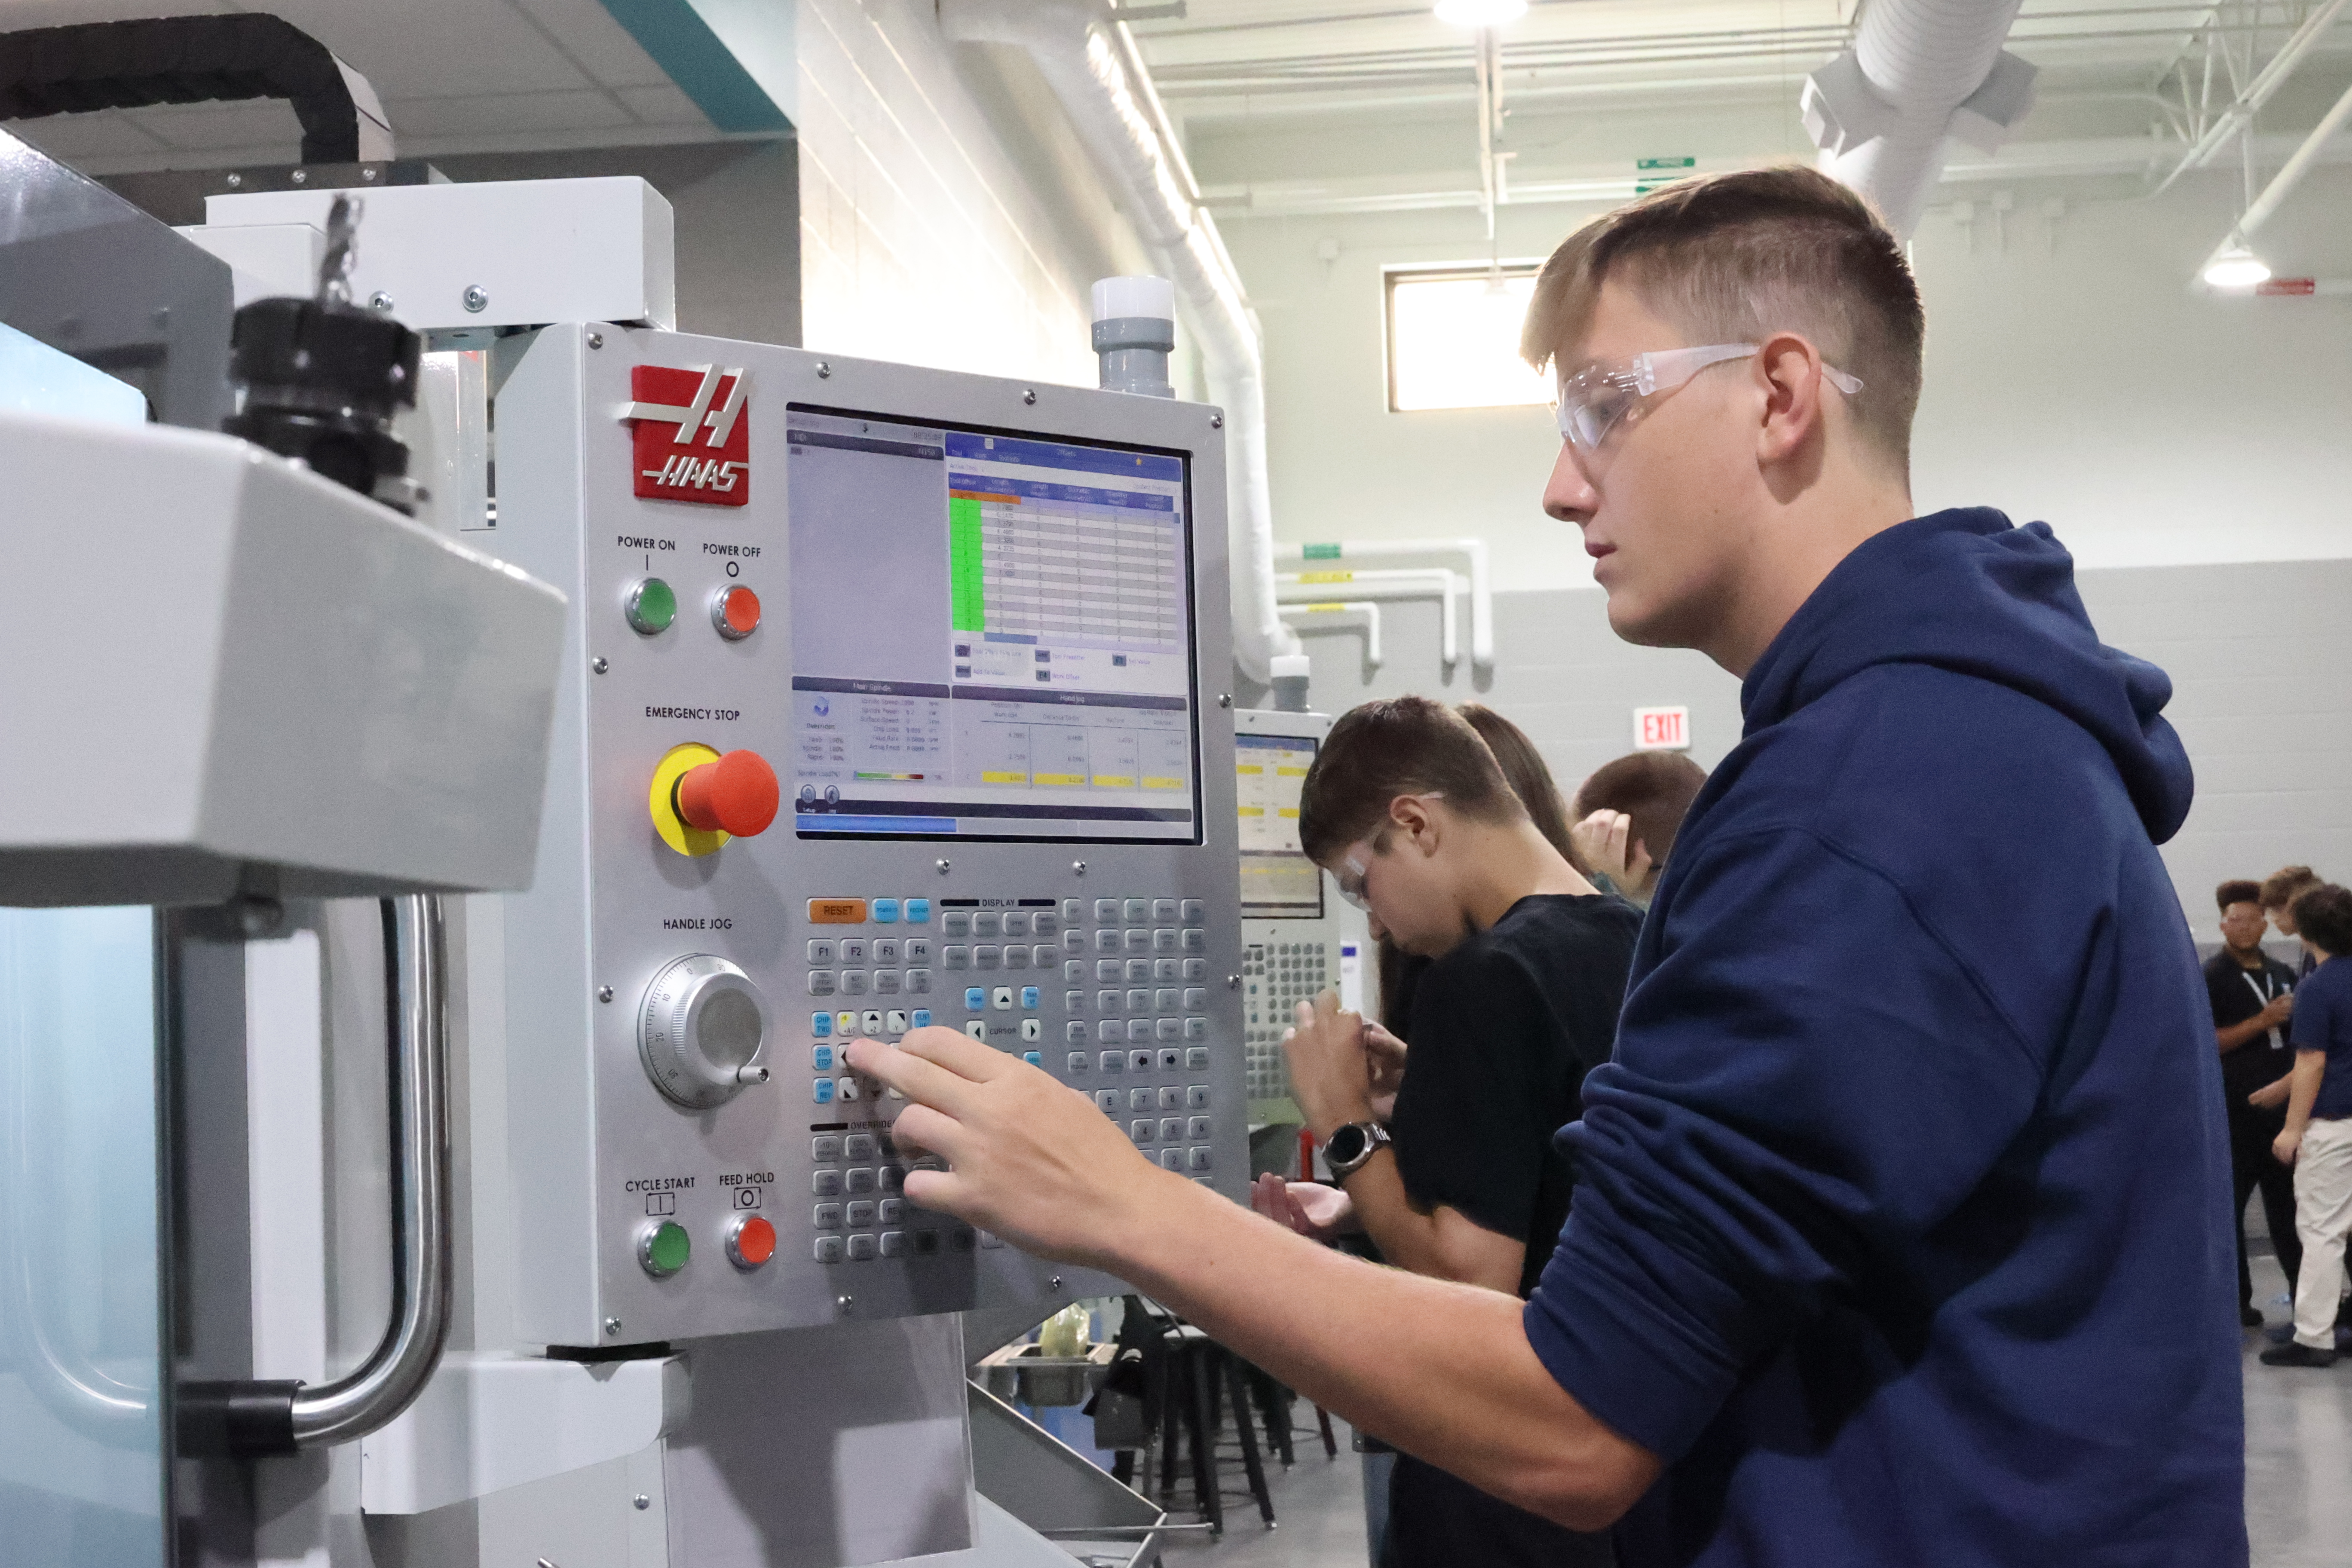 A student is examining the control panel of a machine he is operating.